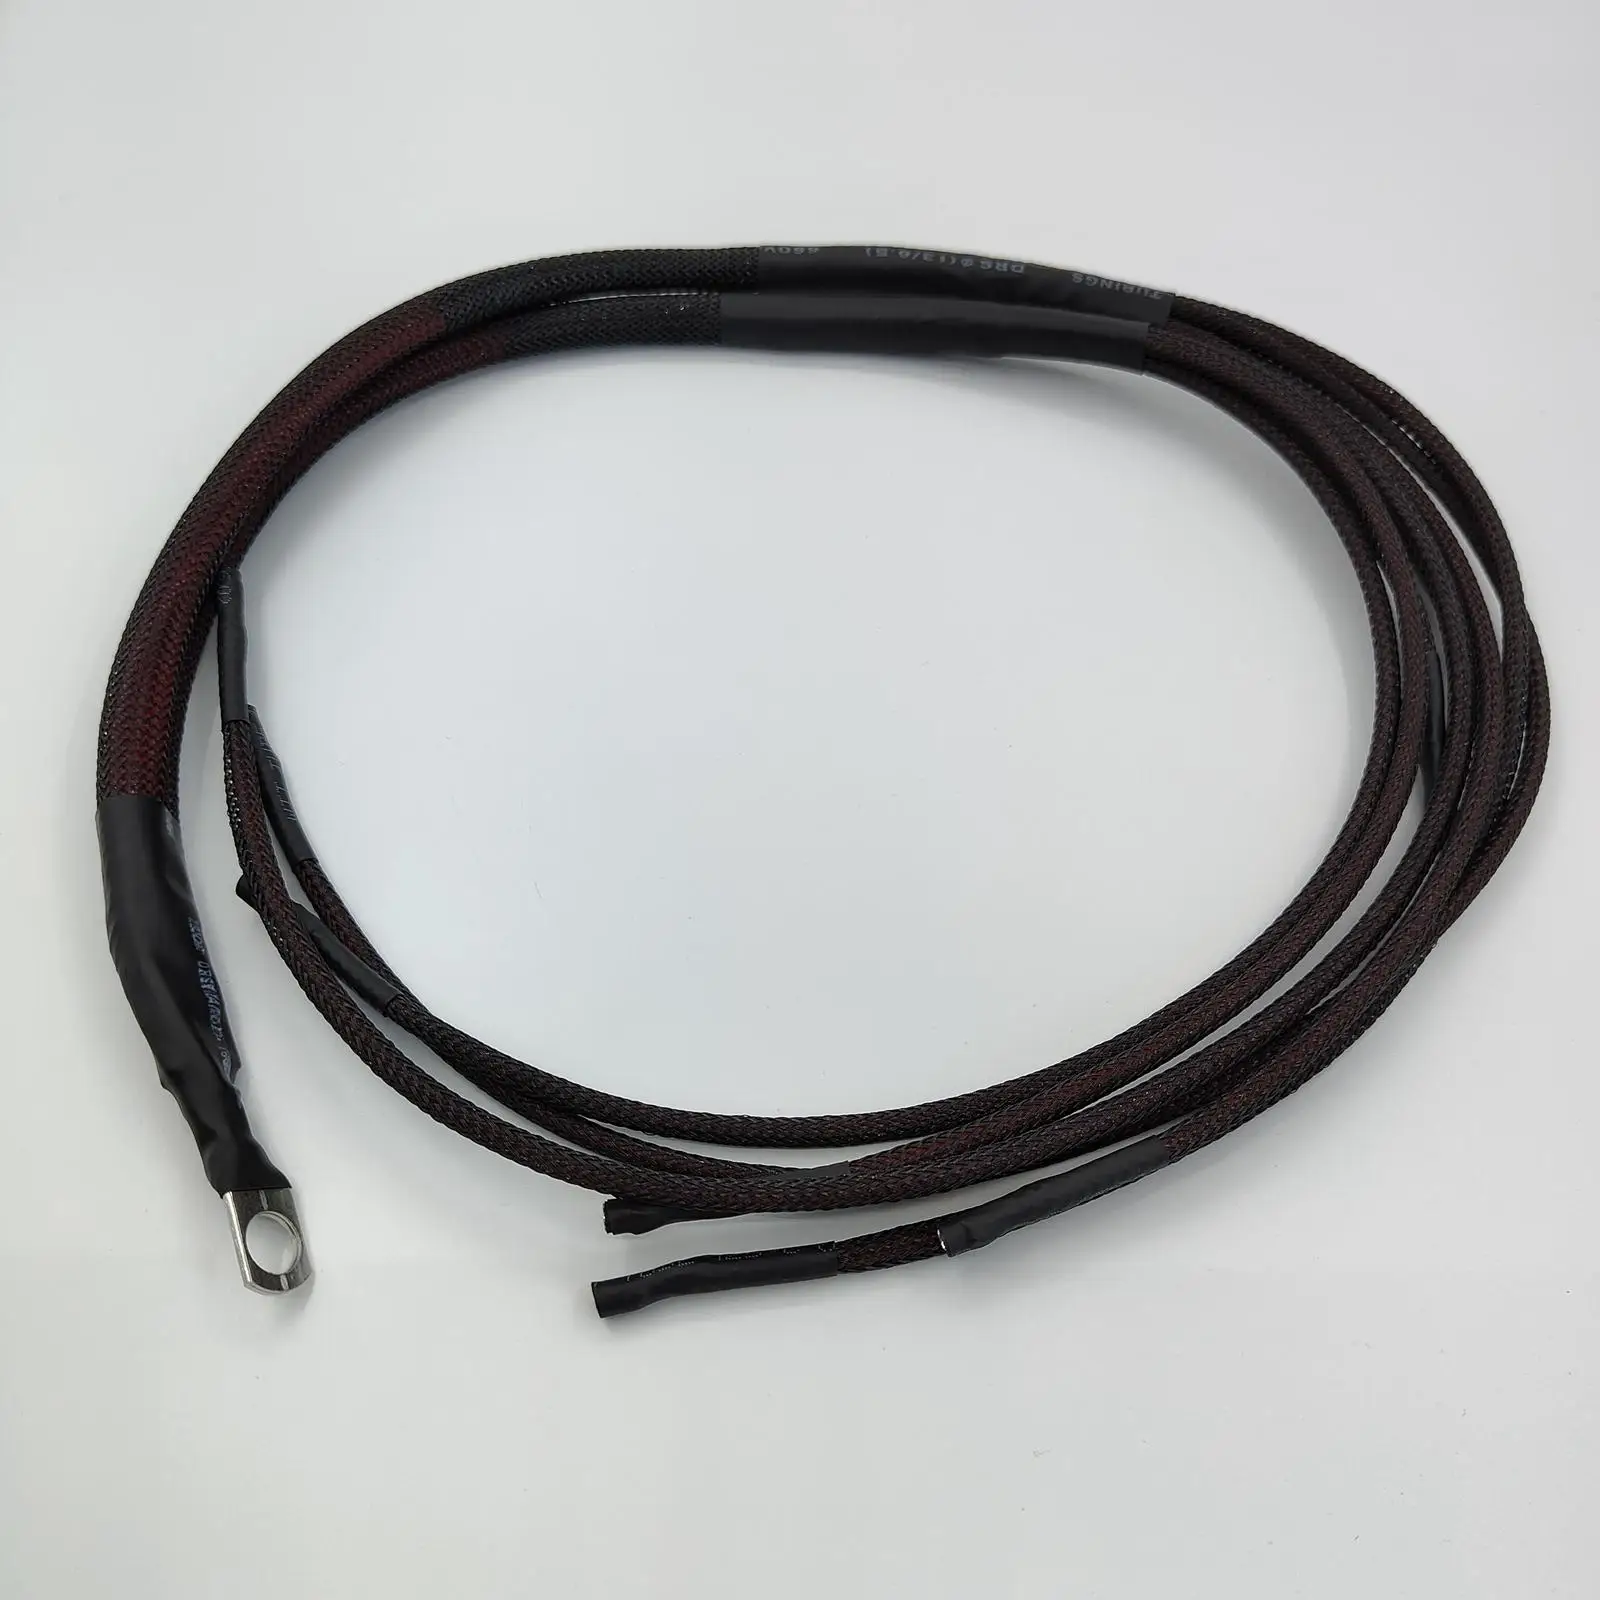 

7.3 Idi Non Turbo Glow Plug Harness Replaces Automotive Durable Power to Controller Cable Aaccessory Relocation Easy to Install